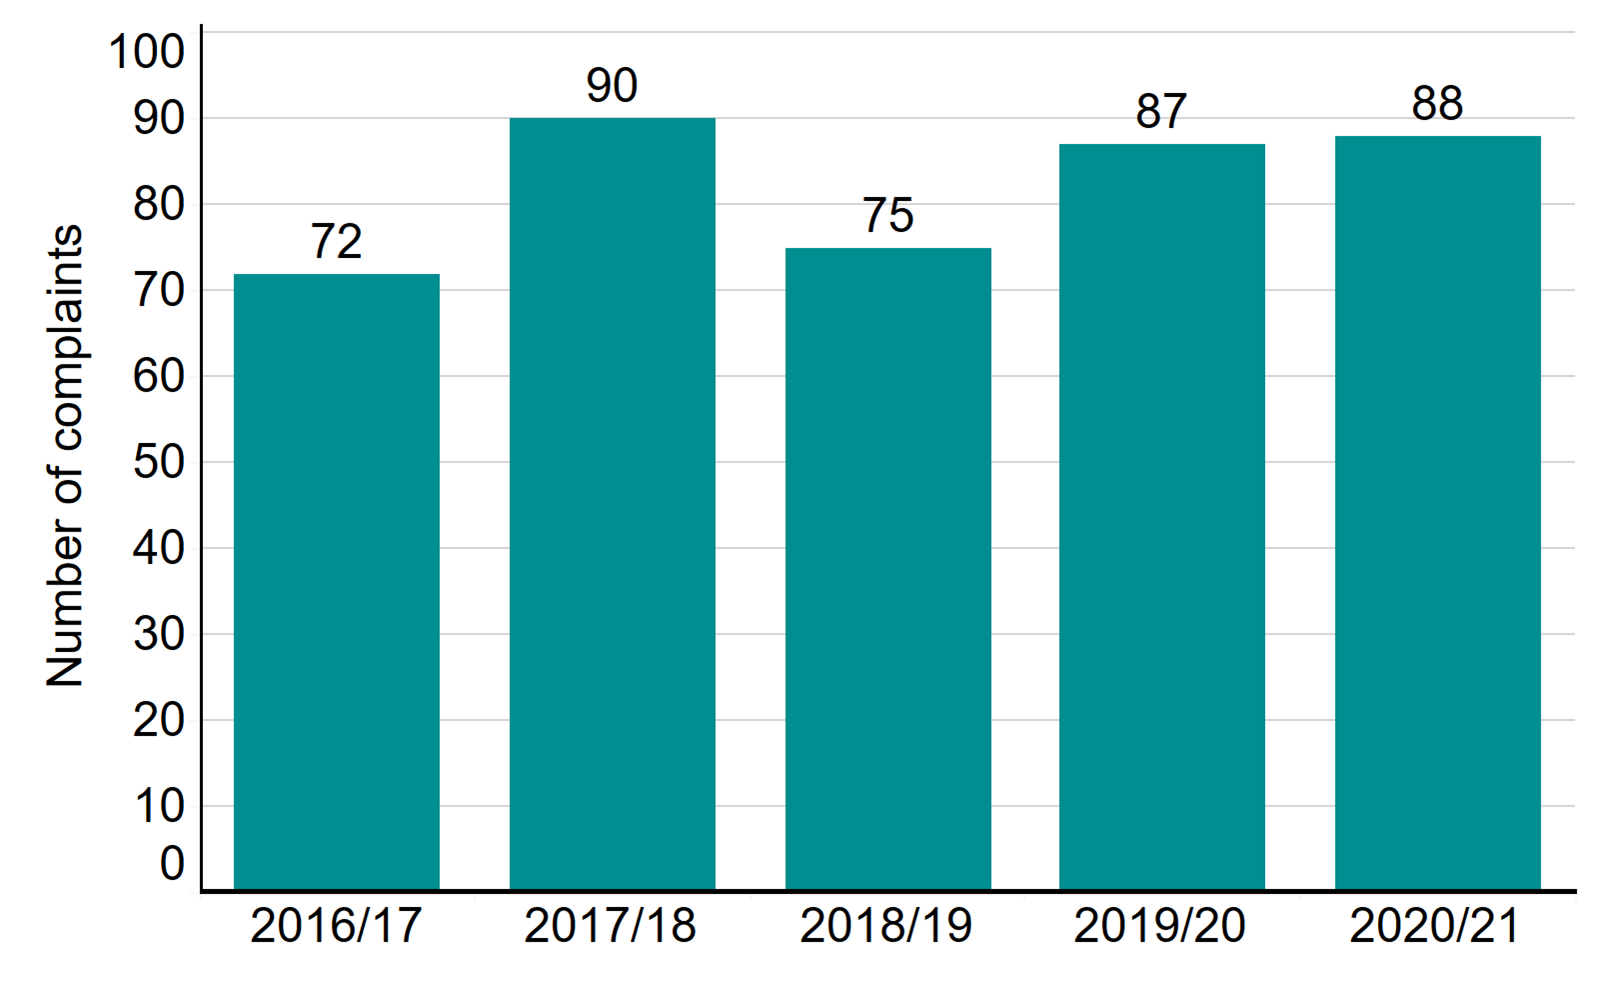 Figure 6: Number of complaints received, 2016/17-2020/21. Number of complaints received, 2016/17-2020/21. This bar chart shows the number of complaints received, from 2016/17 to 2020/2021. There has been little change in the number of complaints in the last few years, with 87 complaints received in 2019/2020 and 88 in 2020/21. An accessible form of the underlying data for this figure can be downloaded at the start of the report in .xls format.